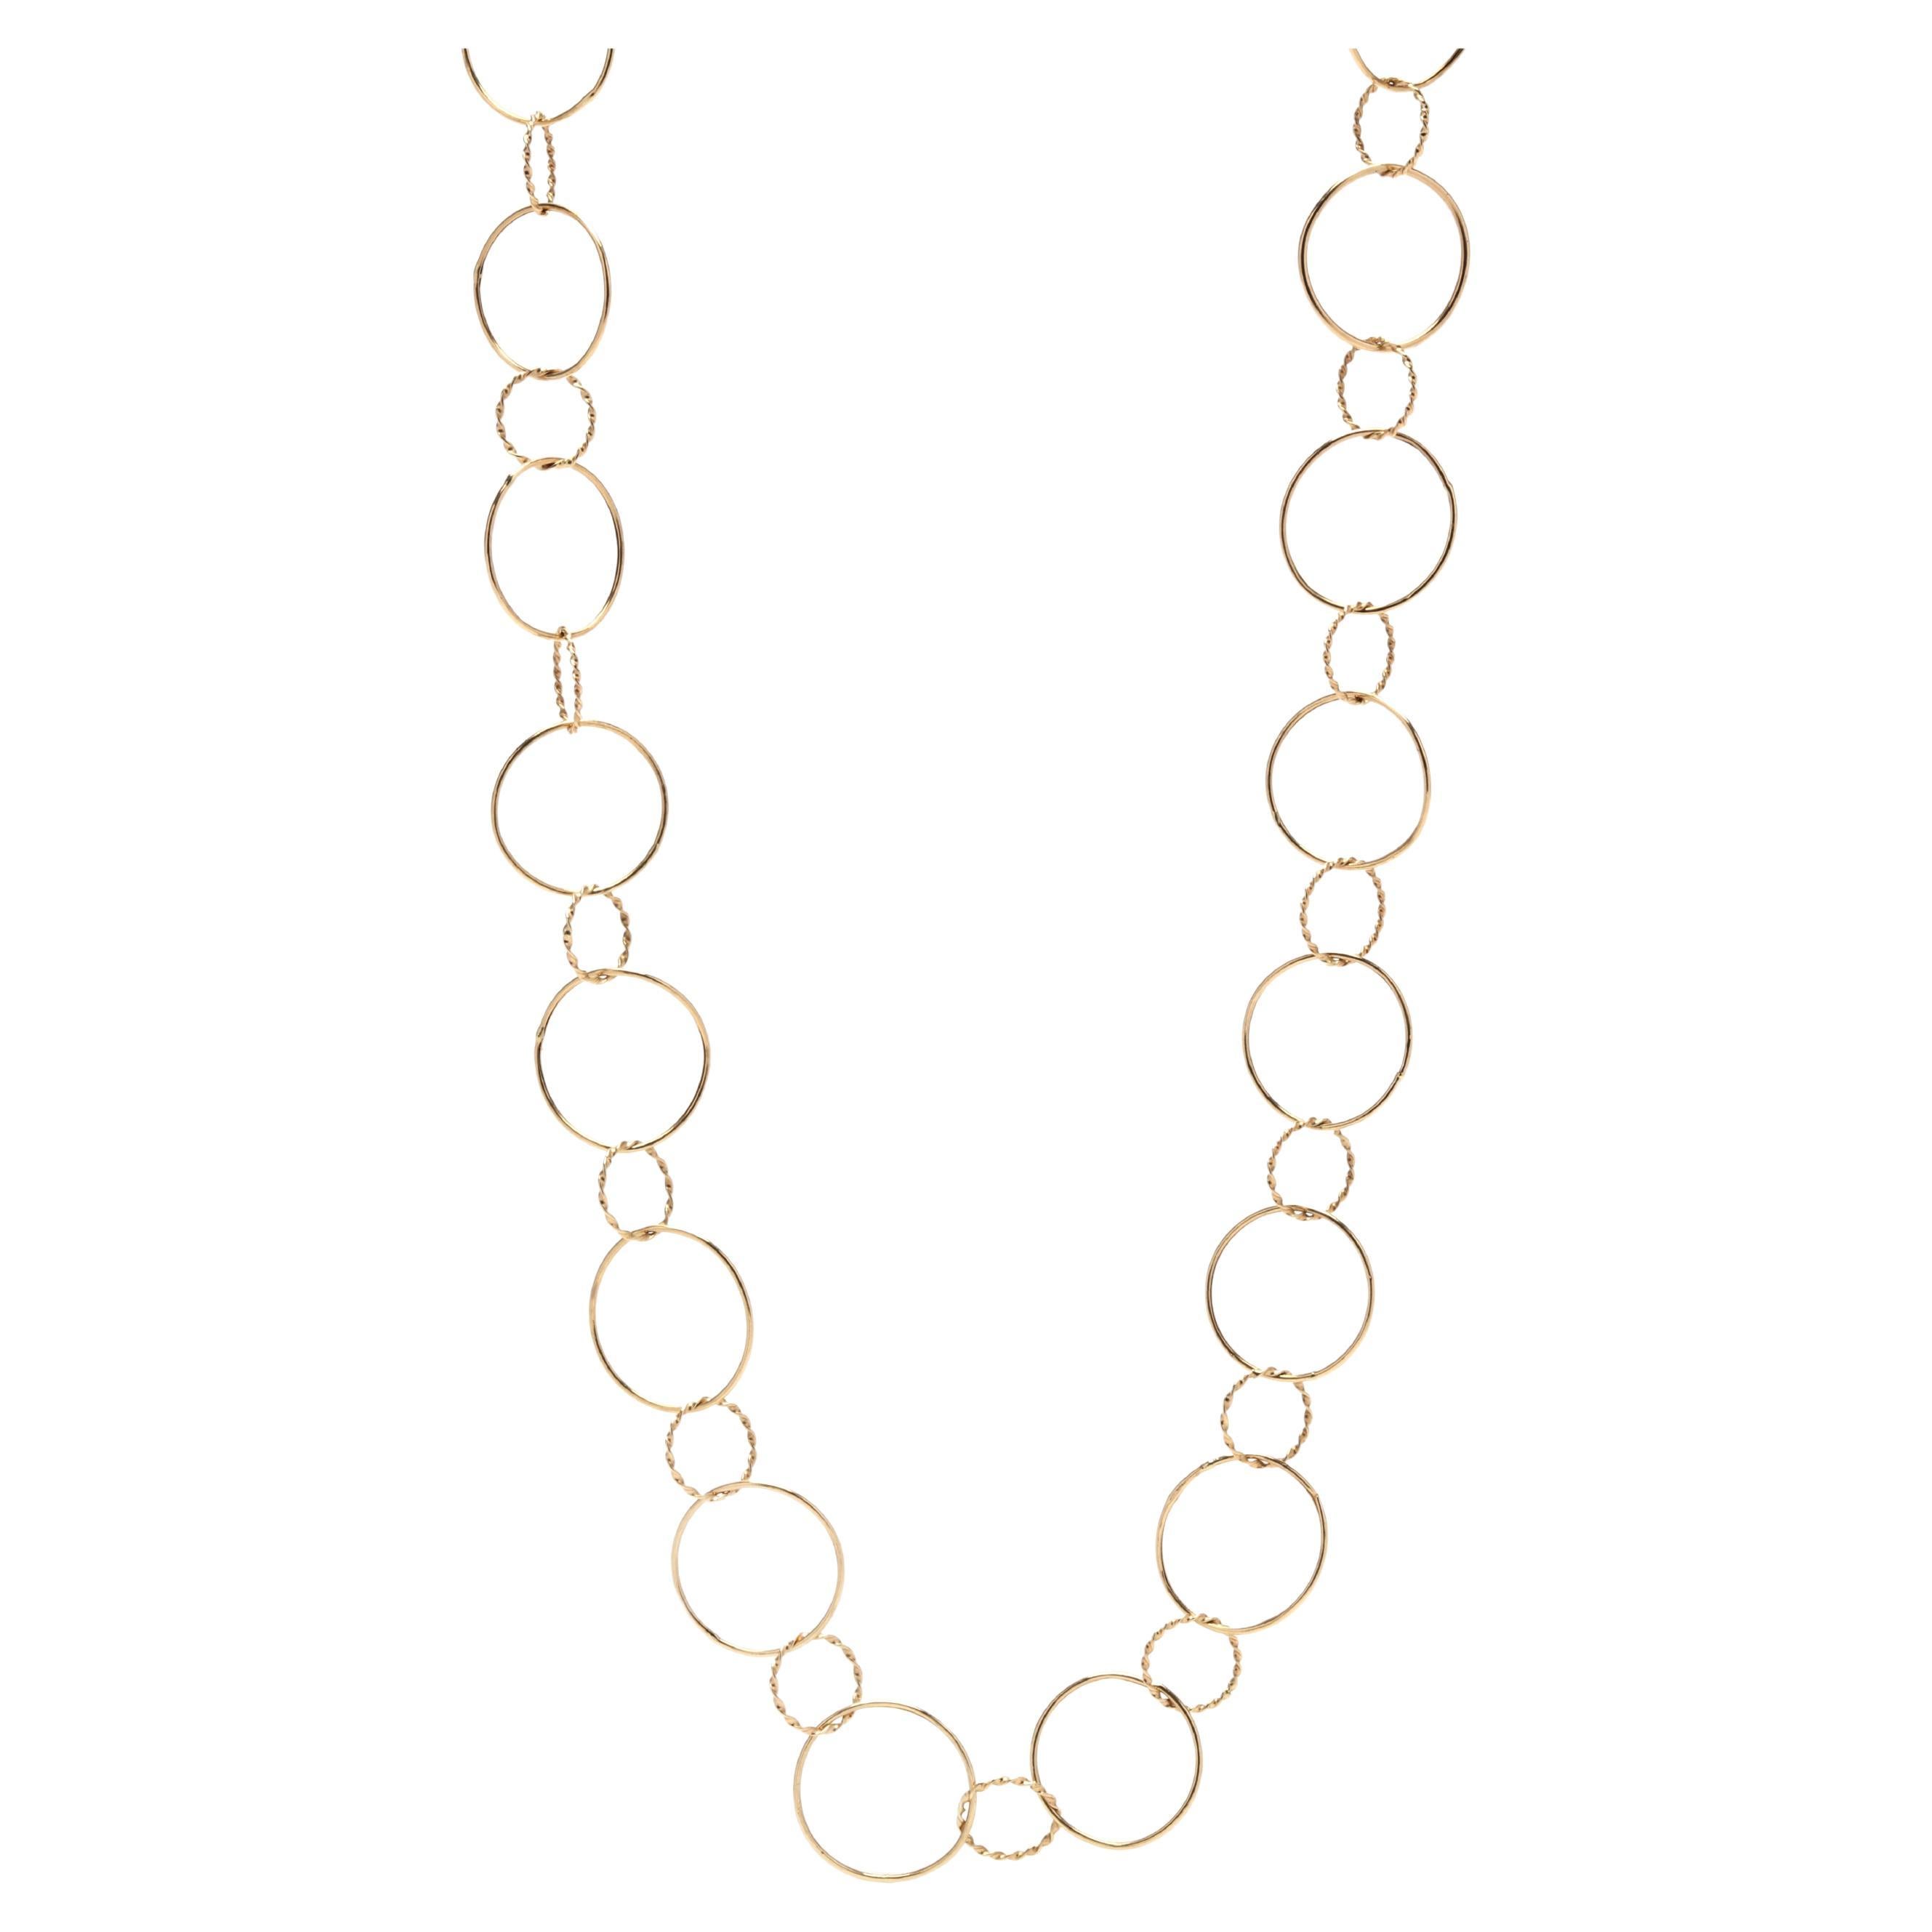 Vintage 14KT Yellow Gold Multi Circle Chain Necklace